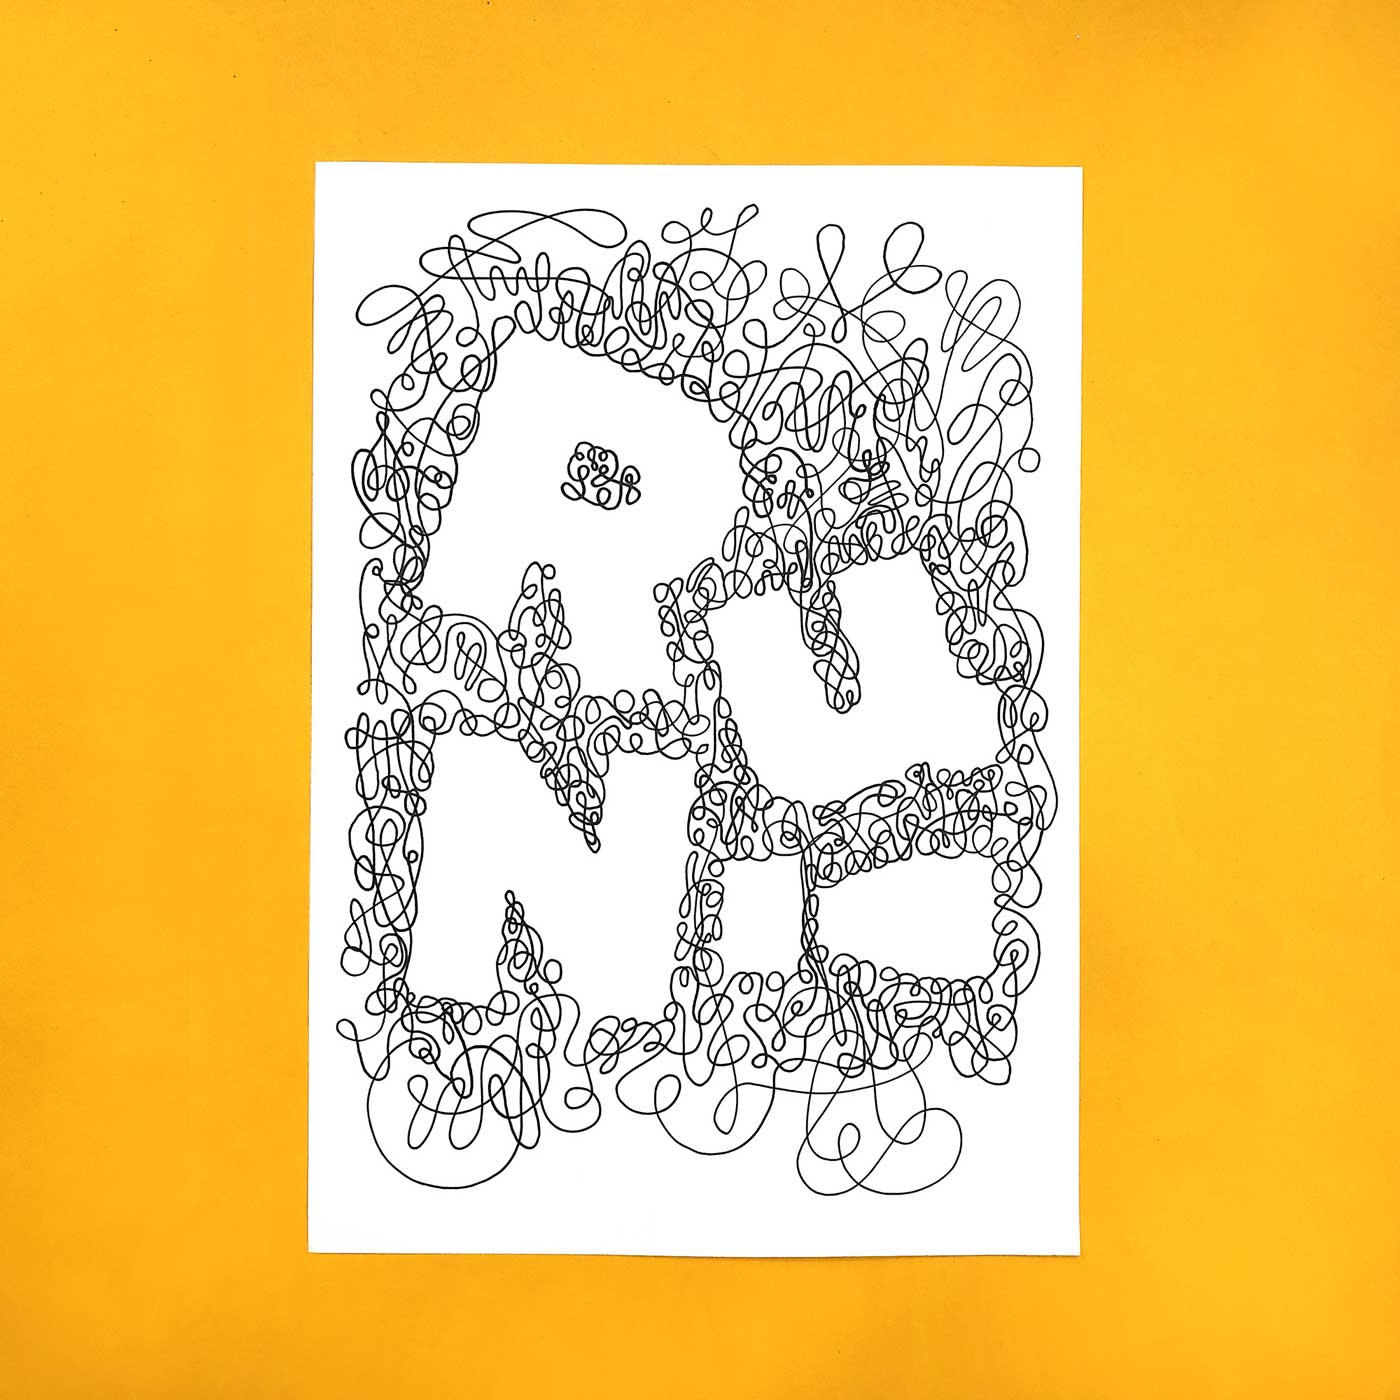 A typographic poster that says RUN